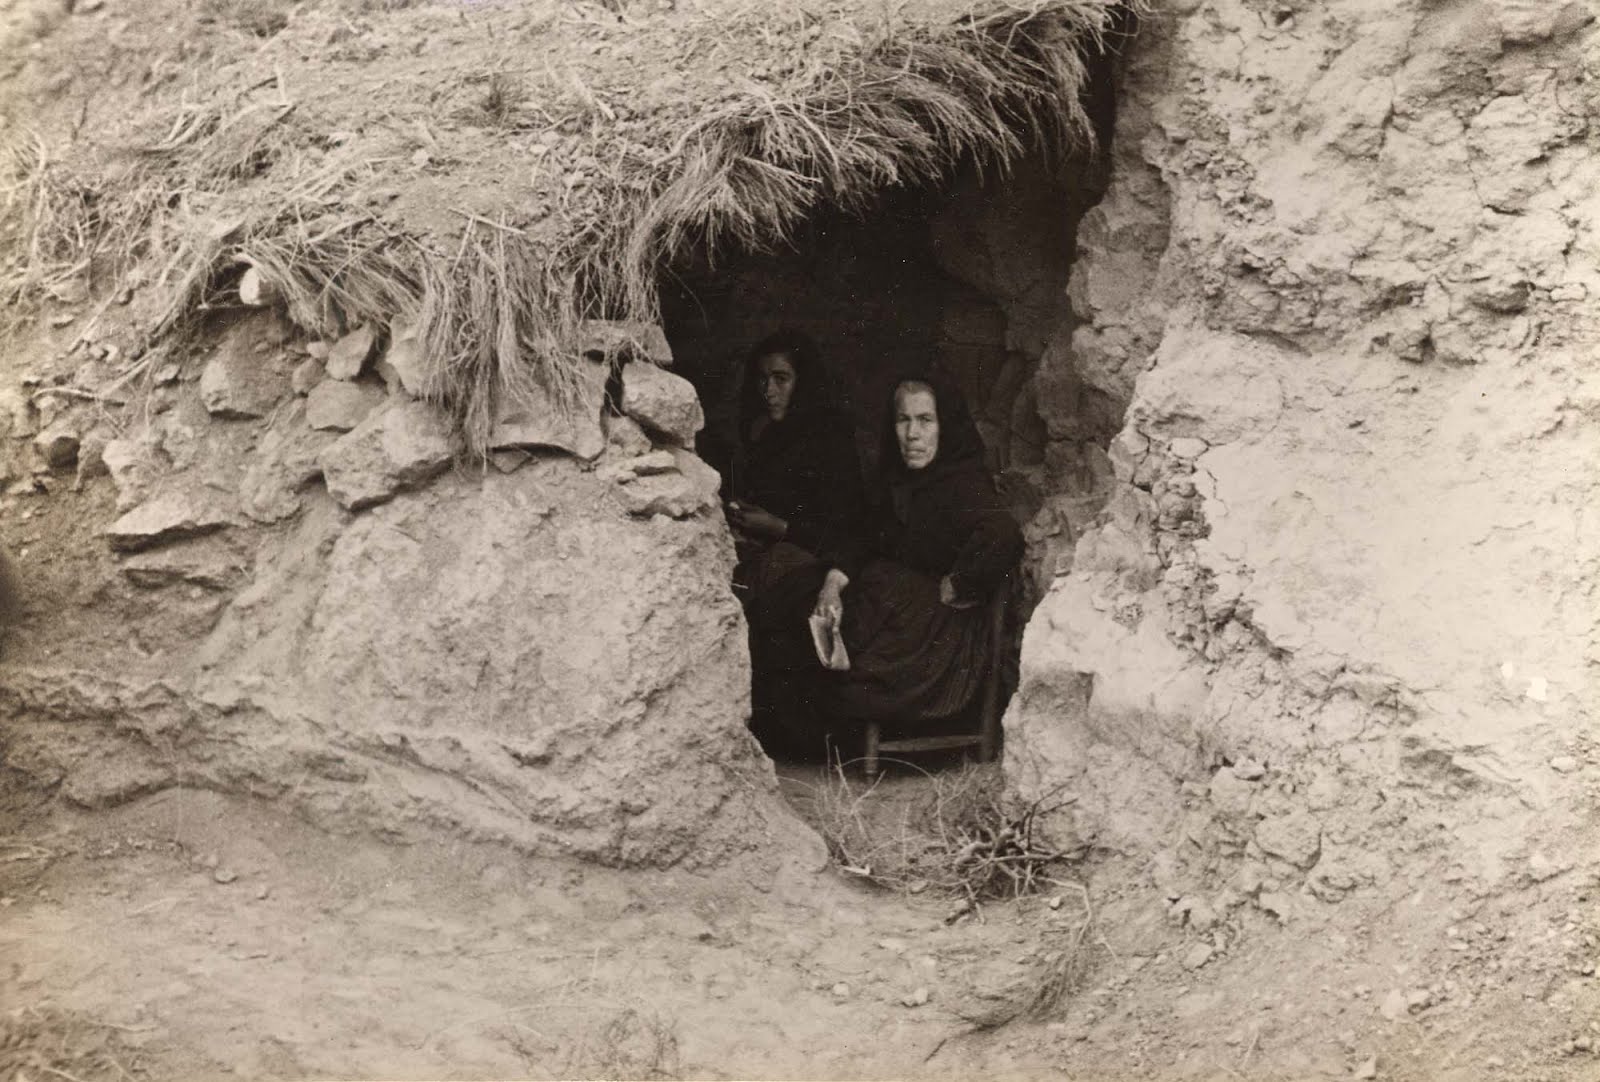 A photograph of two cloaked persons crouching inside a cave